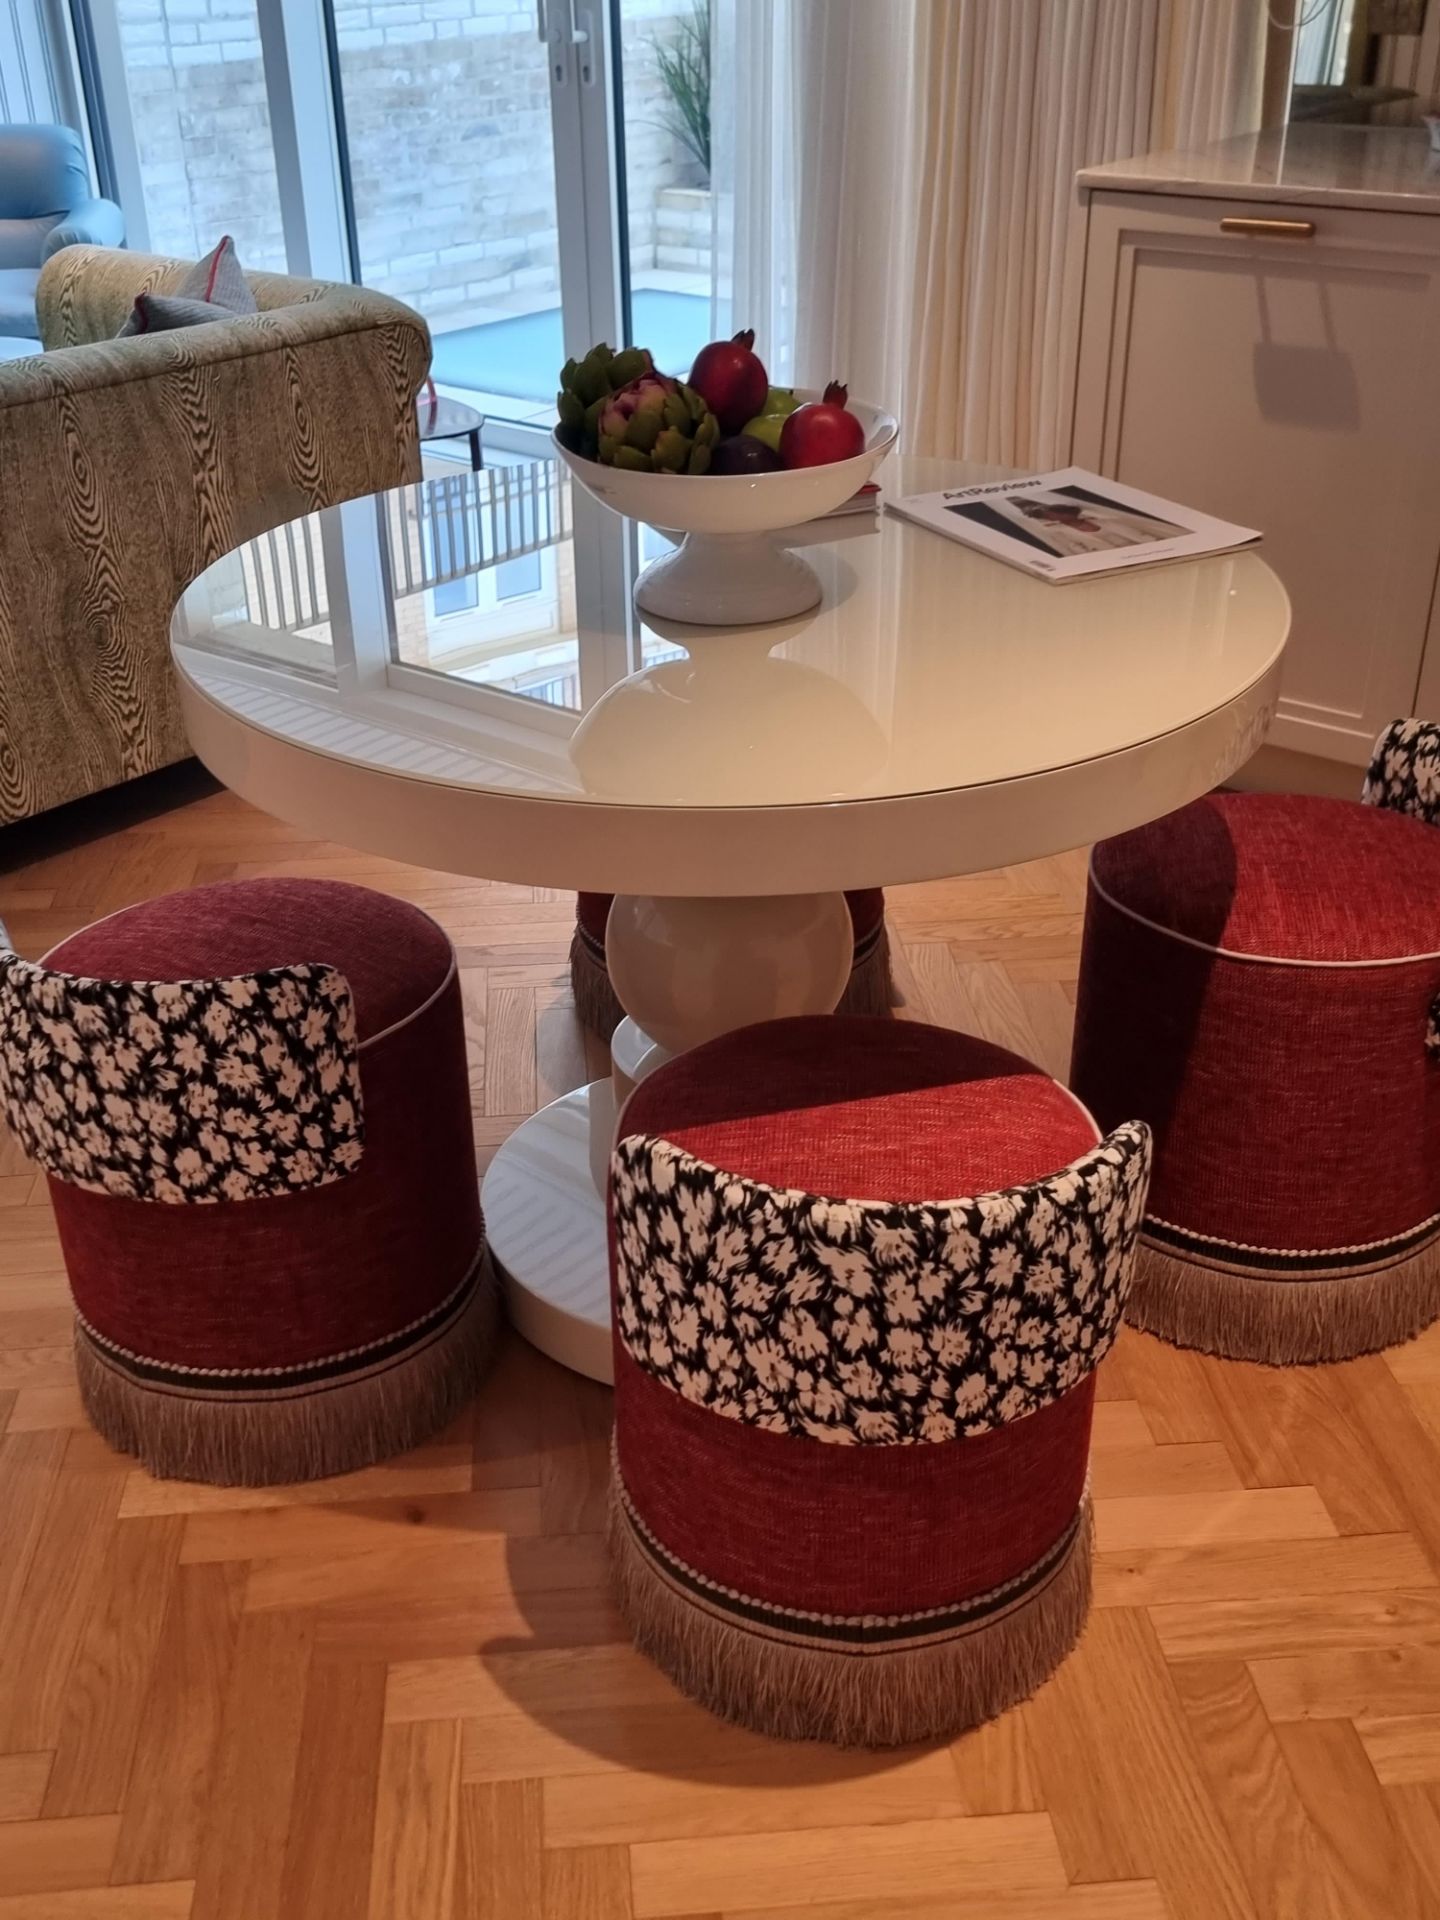 A Set Of 4 Retro-Style Upholstered Signature Pouf Chairs - The Ultimate Dining Seats! With A